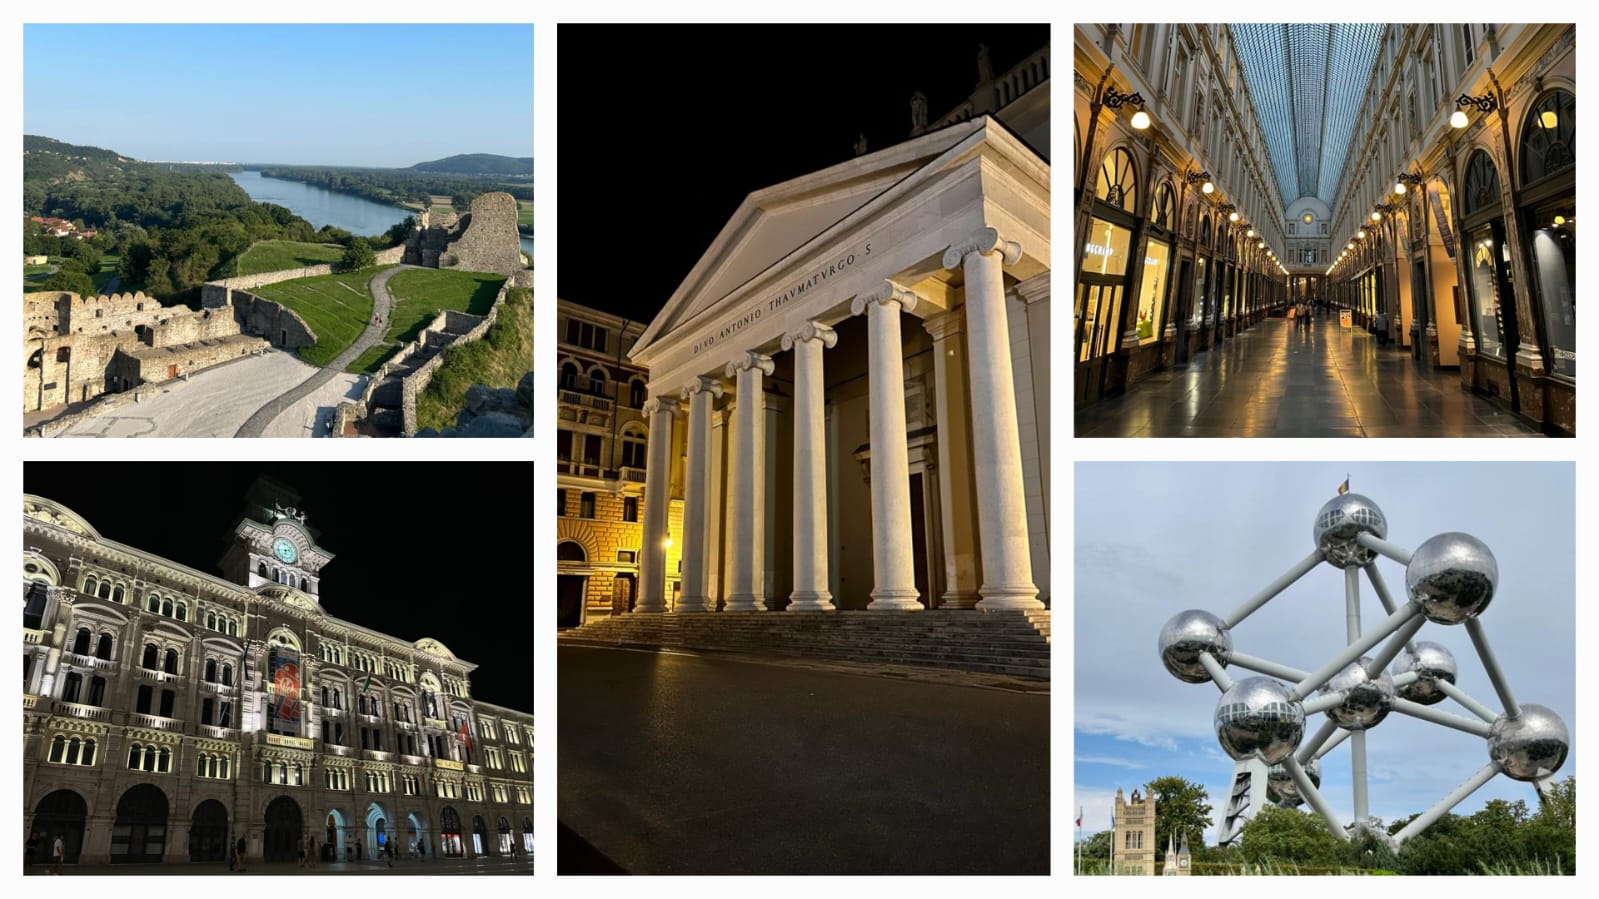 Sights and cultural buildings from Slovakia, Croatia,Italy, Belgium and Austria